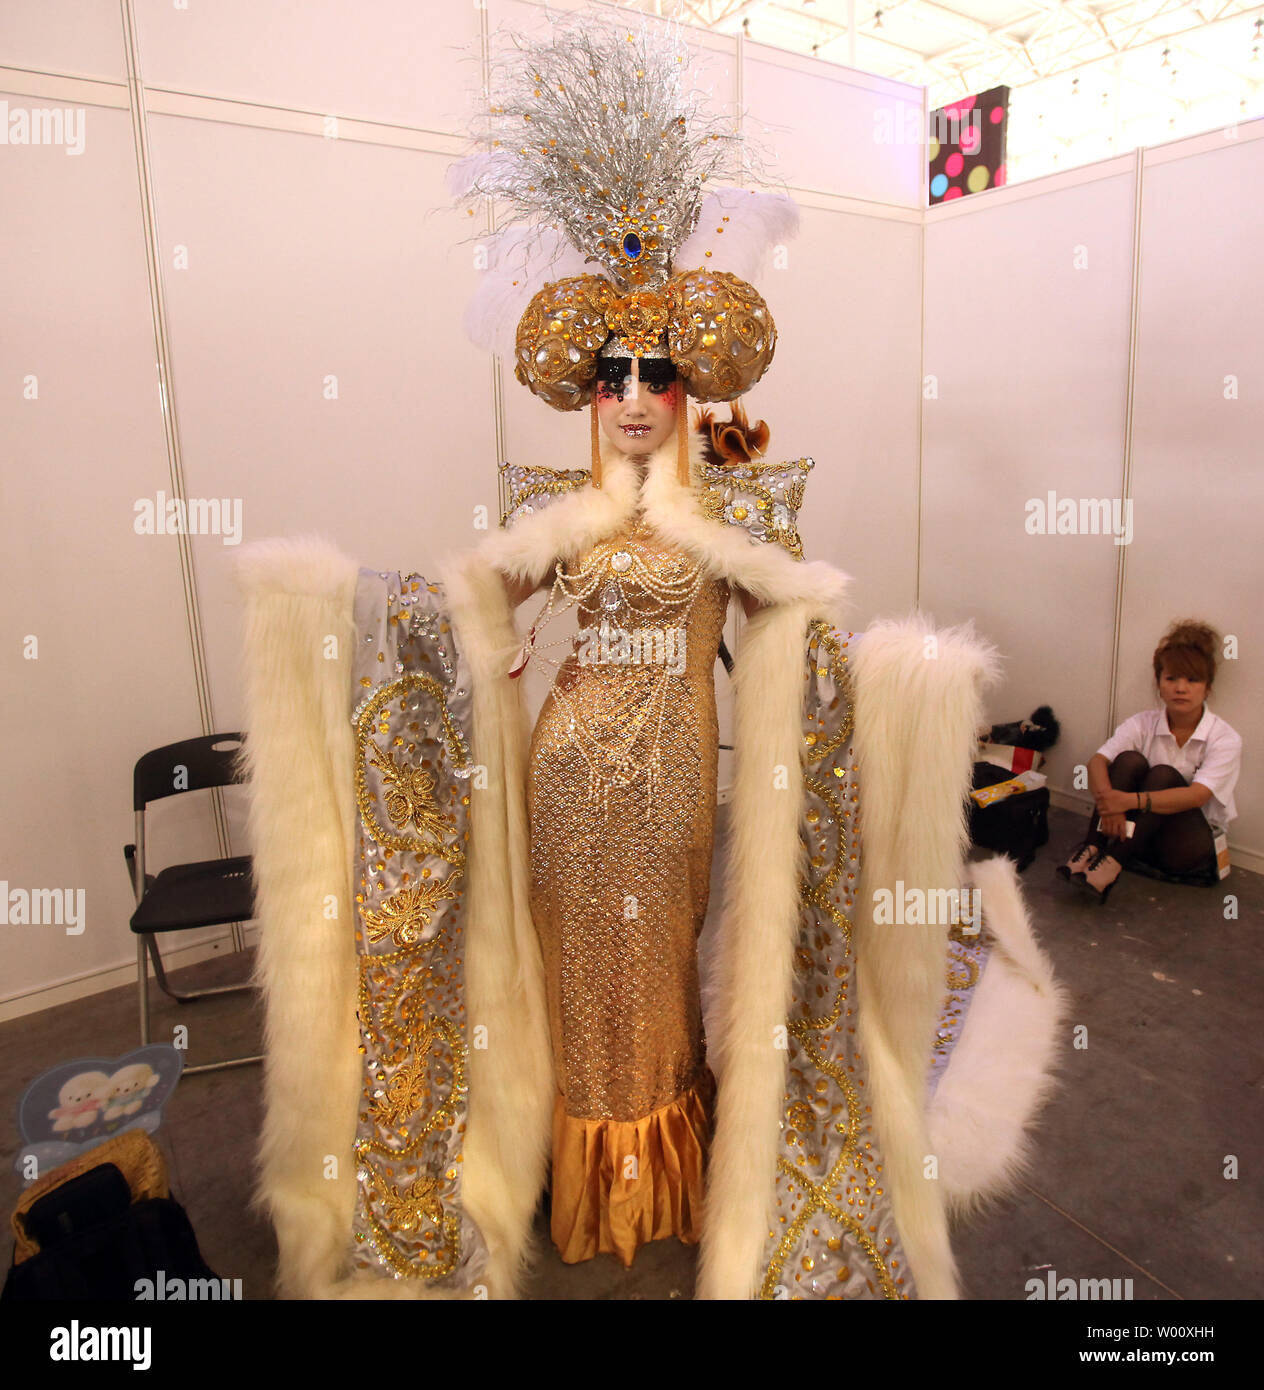 Chinese models dressed in fancy wedding gowns and adorned with costume  jewelry attend the 2011 China Hair and Beauty Expo in Beijing on June 29,  2011. The models, along with their sponsors,